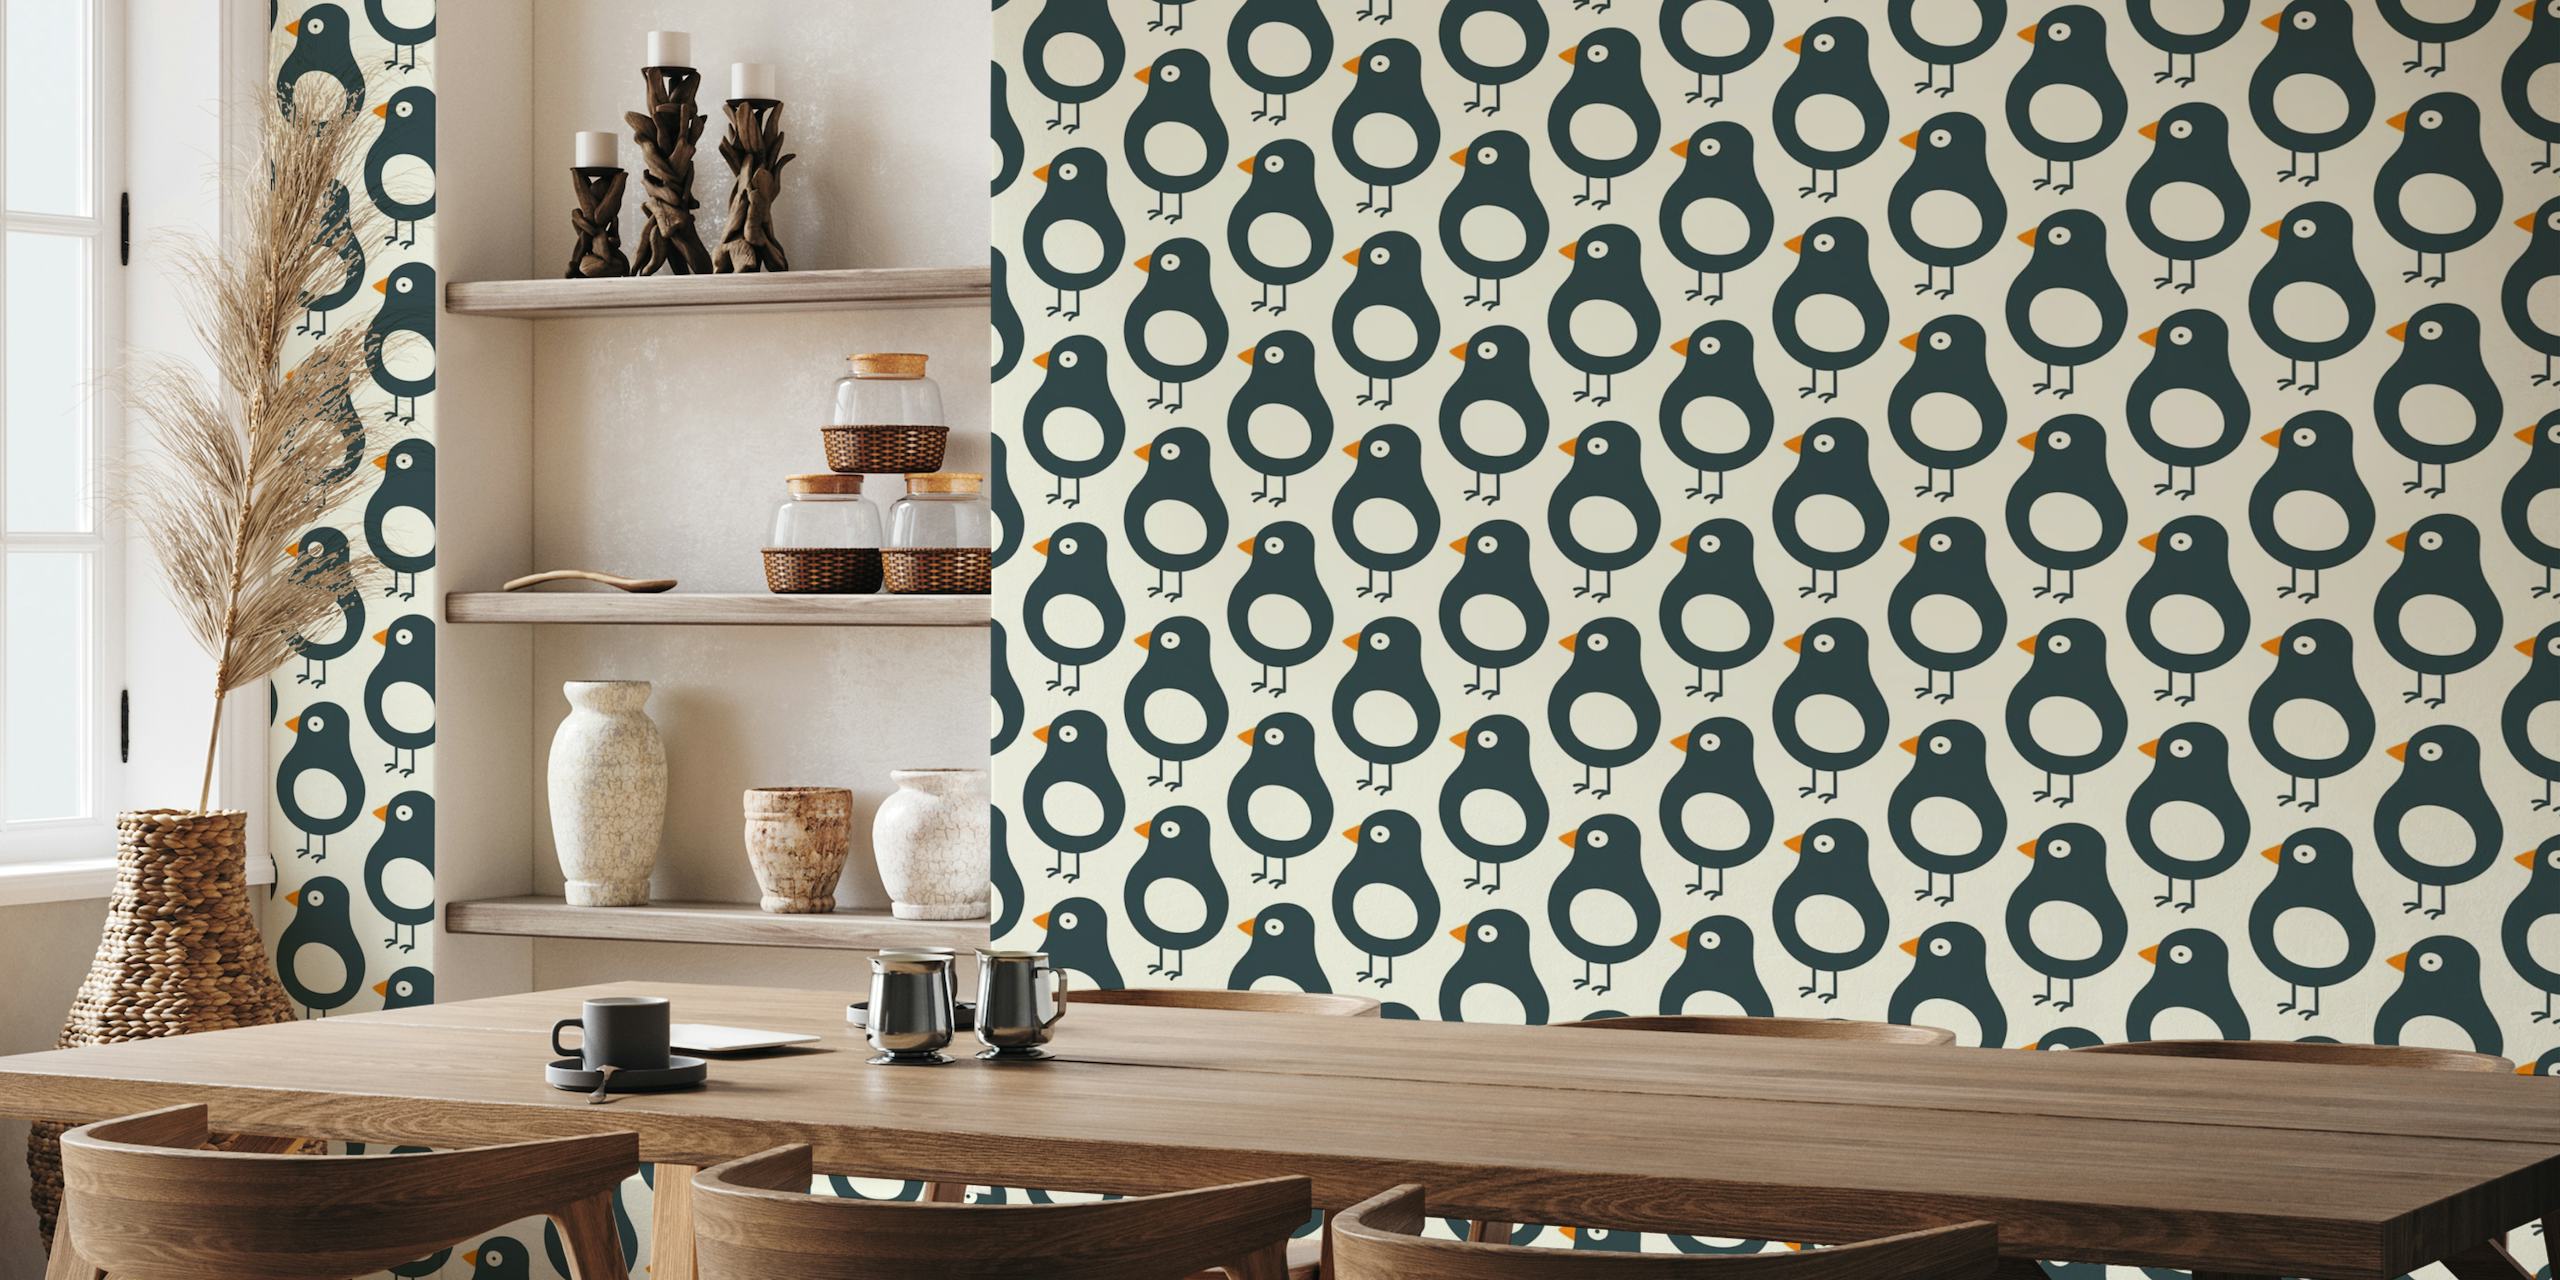 Whimsical bird pattern wall mural with earthy tones on a light background